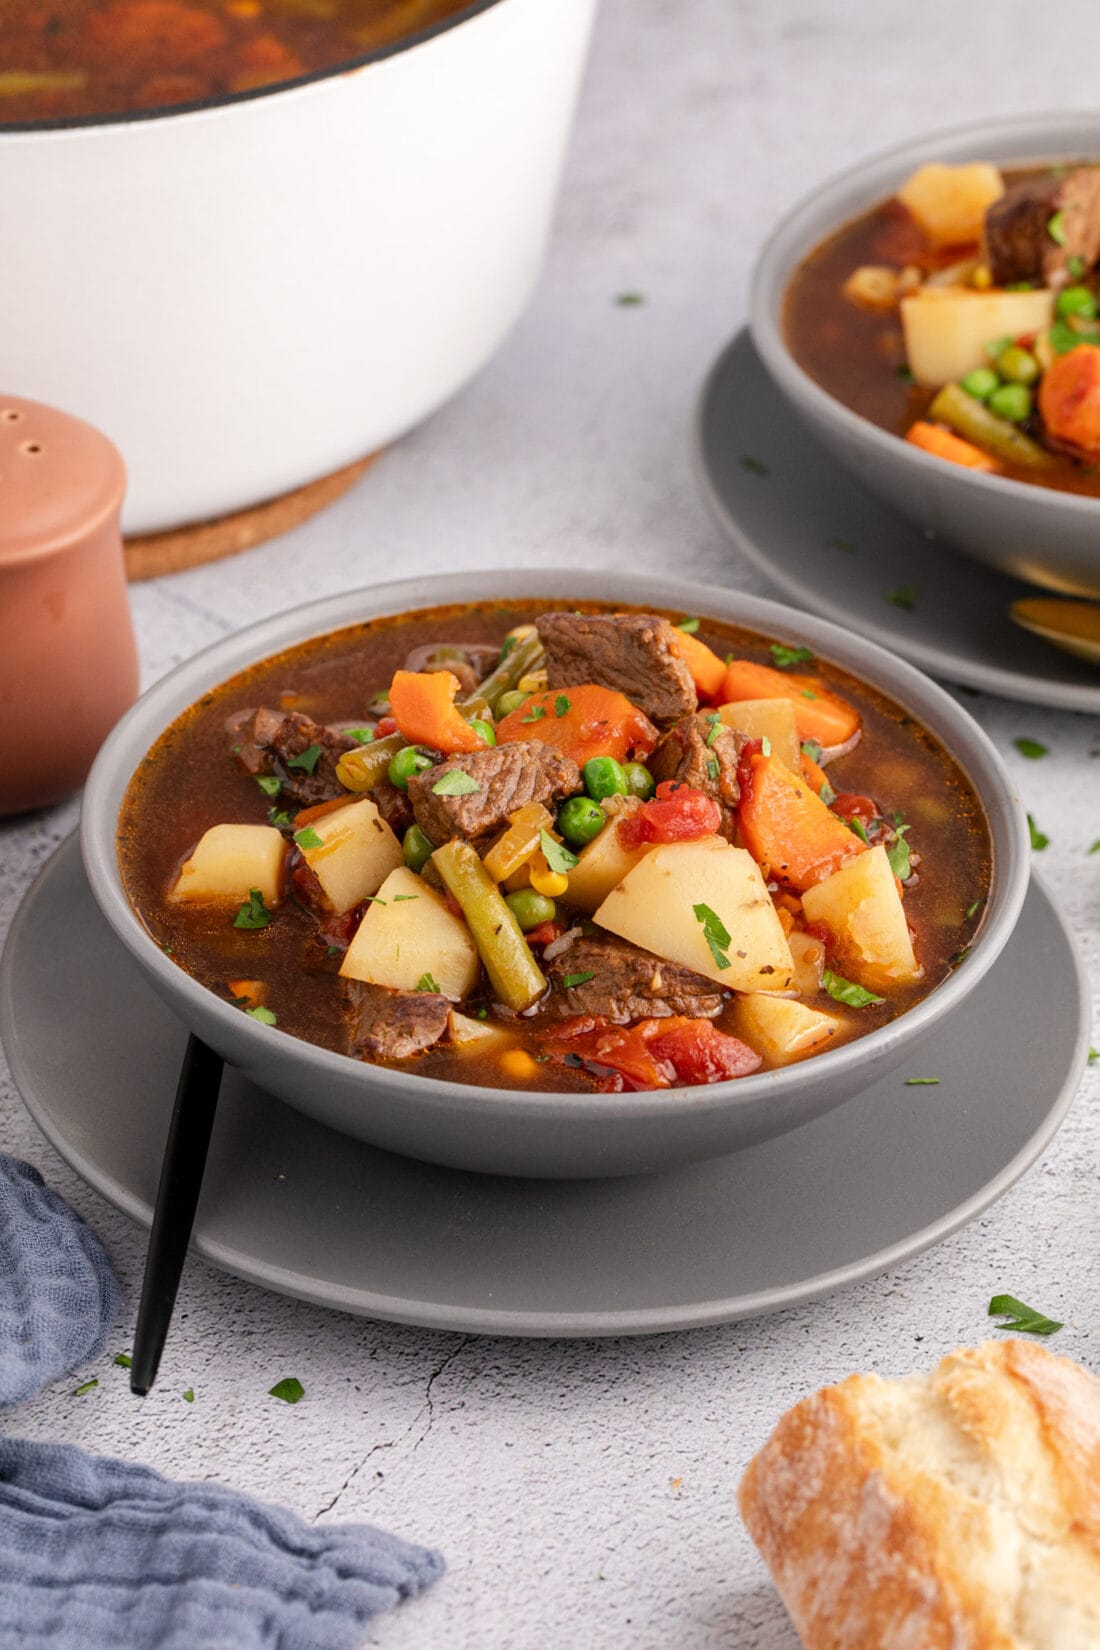 Bowl of Vegetable Beef Soup